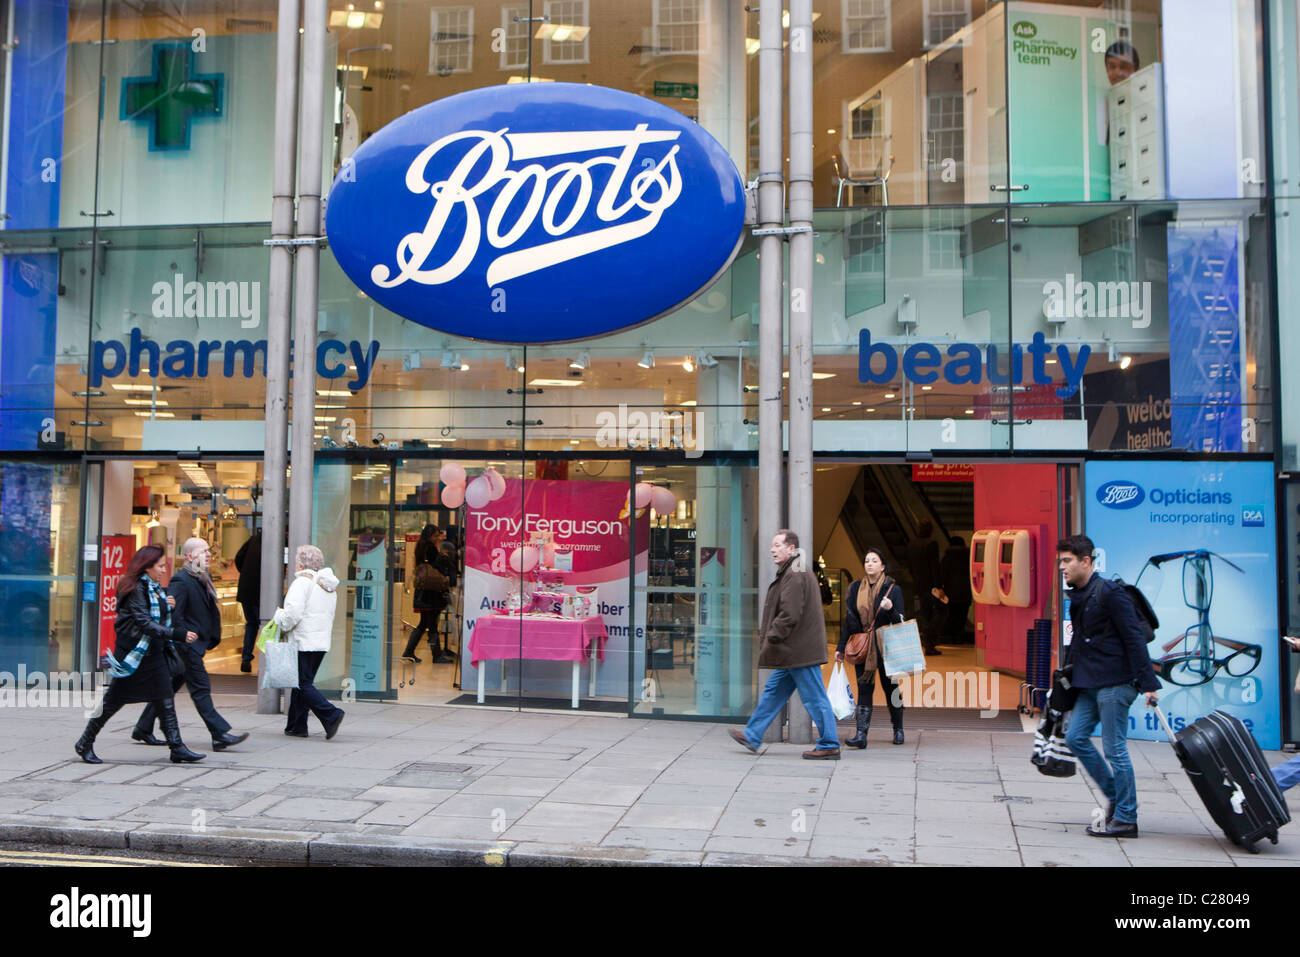 Boots Shop Front High Resolution Stock Photography and Images - Alamy